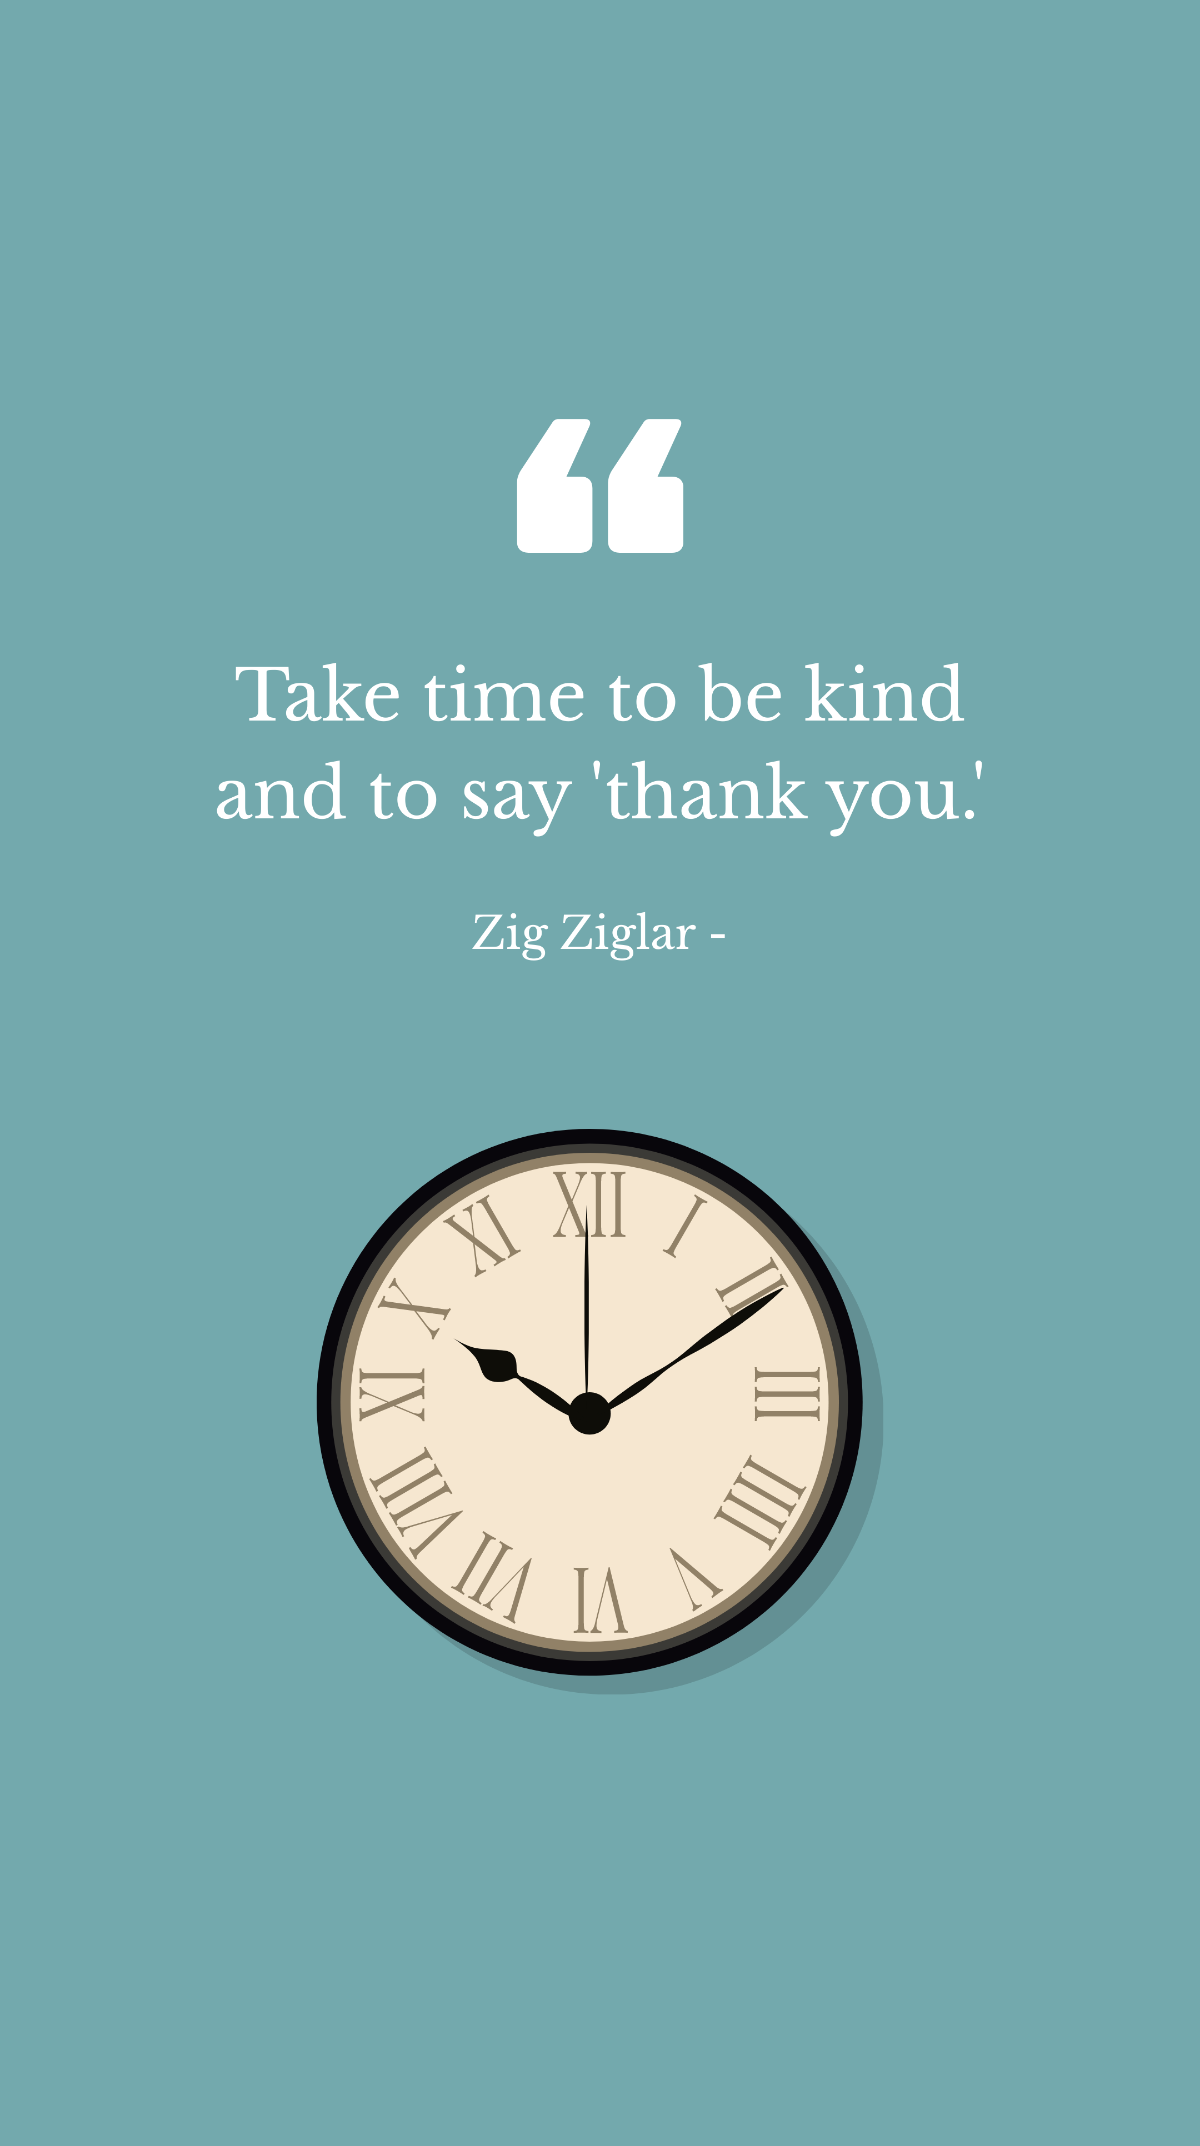 Zig Ziglar - Take time to be kind and to say 'thank you.'